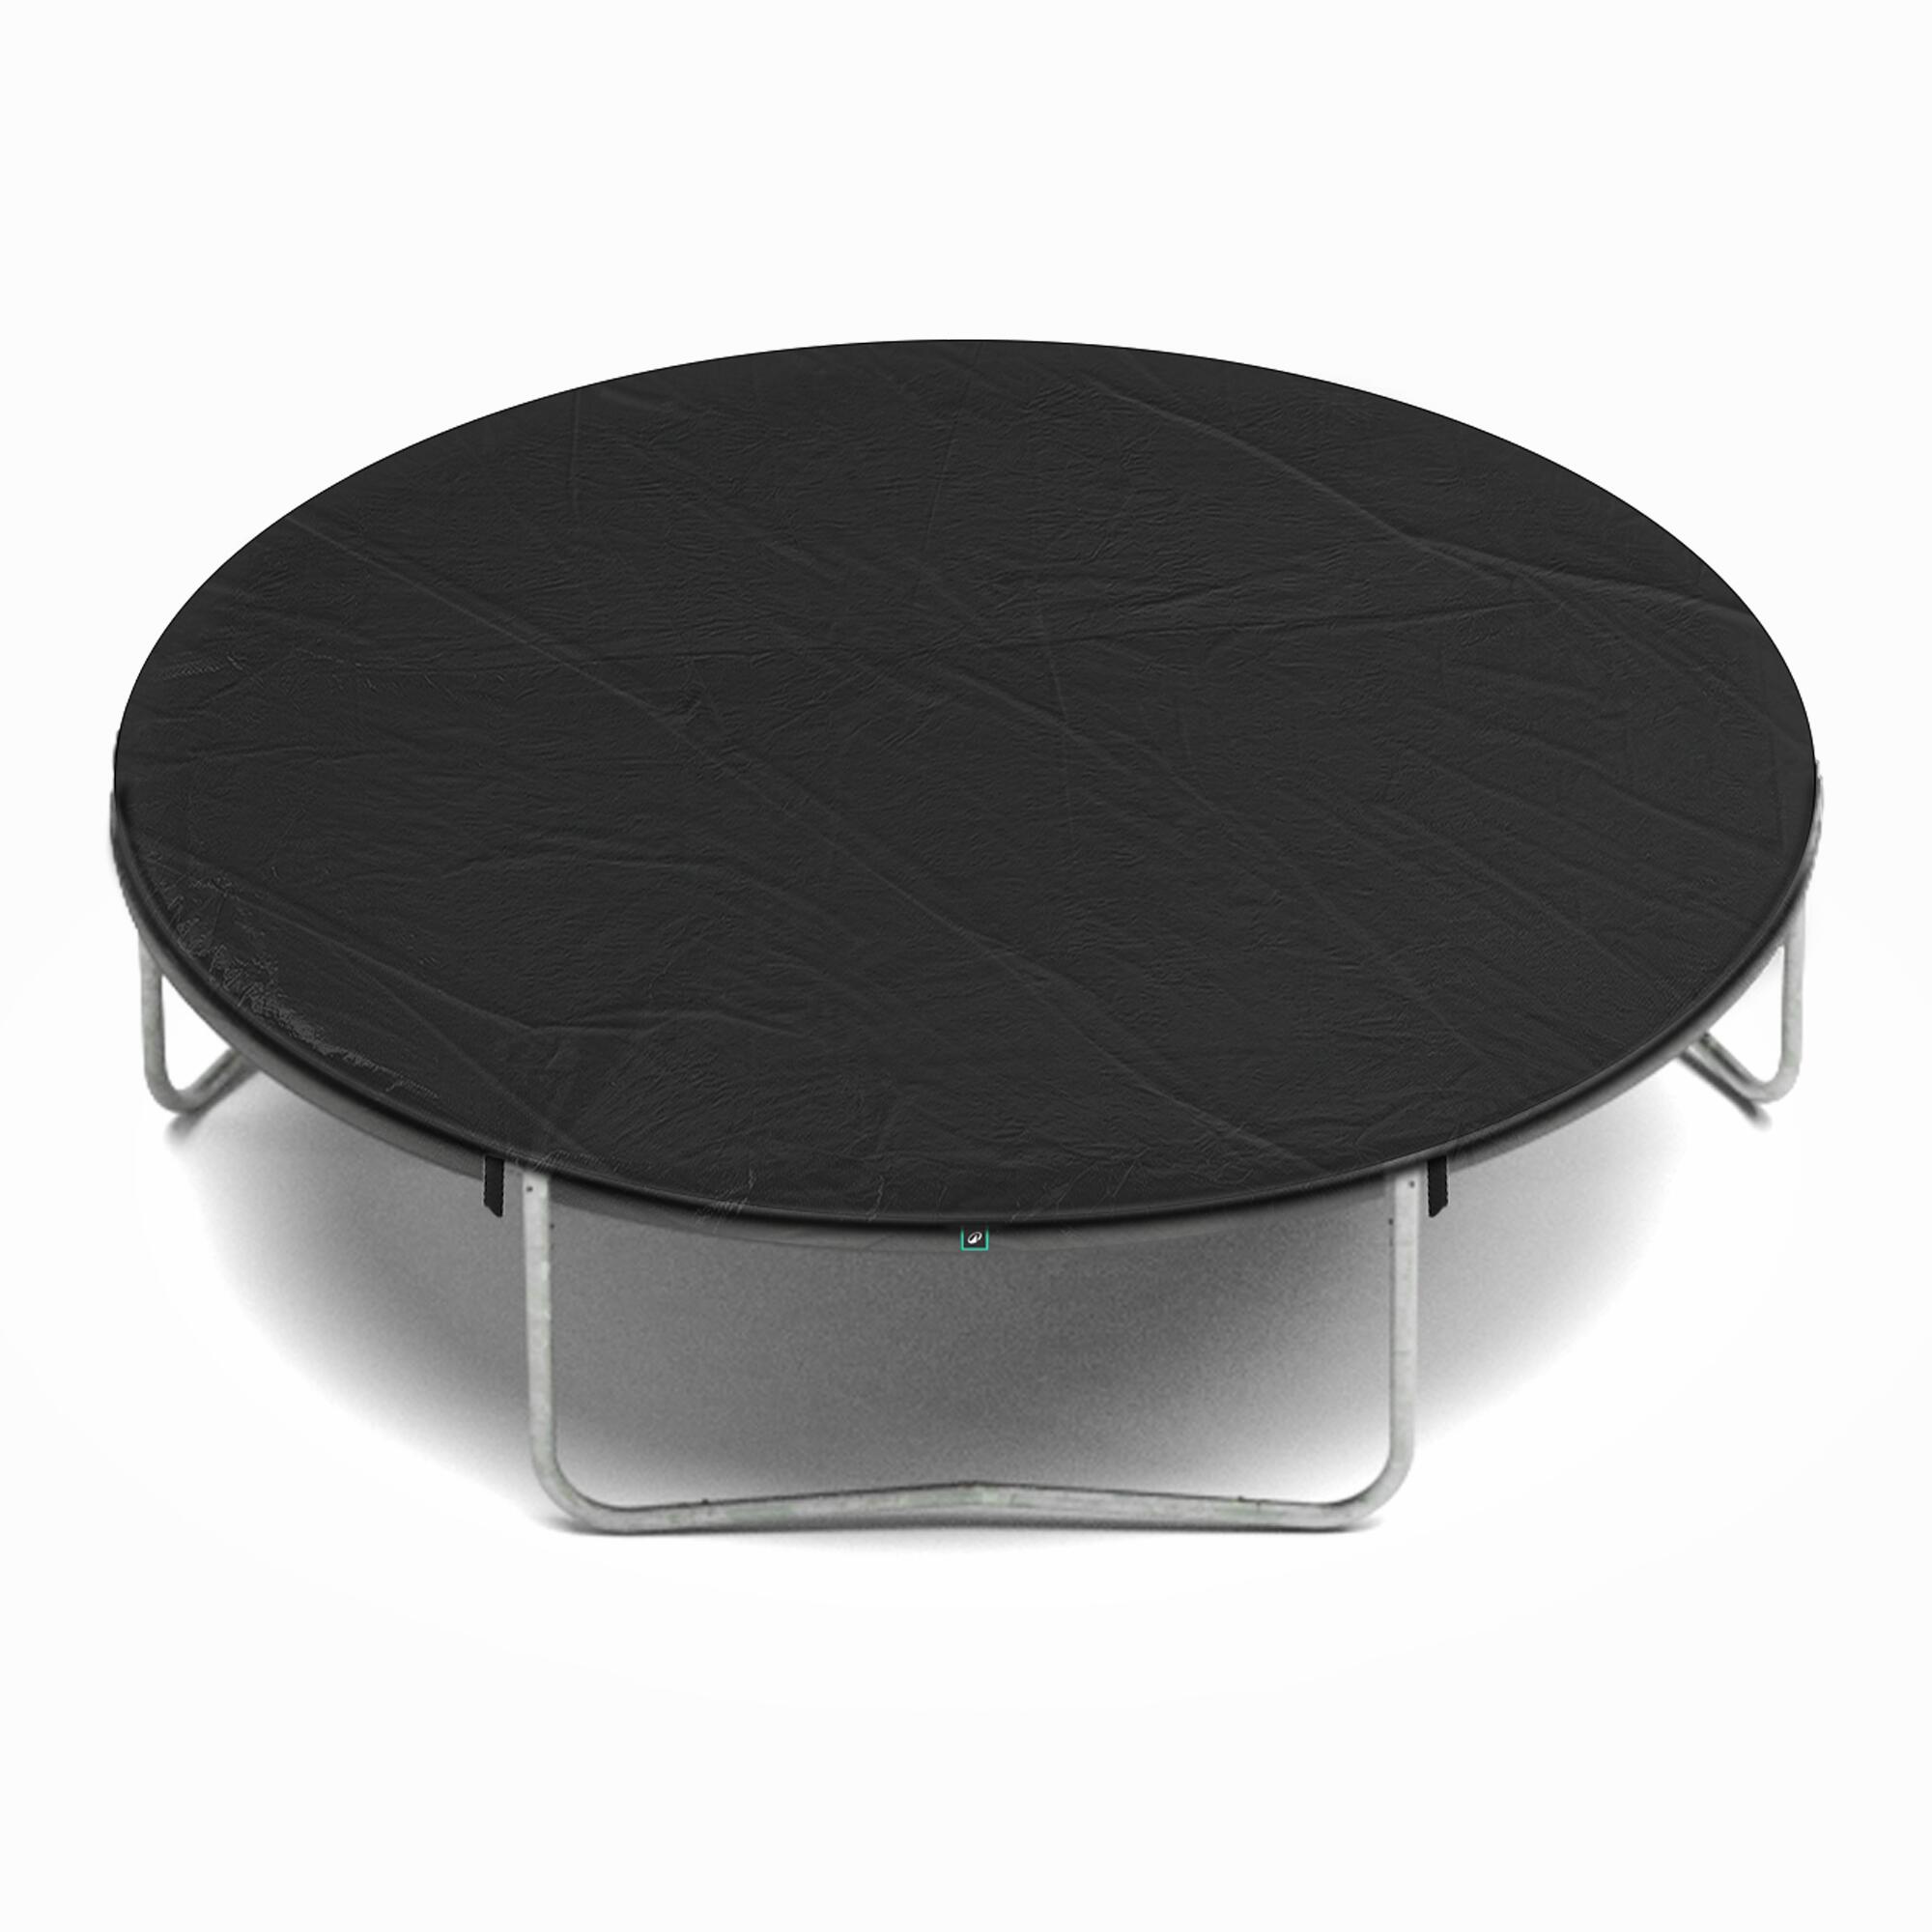 DOMYOS Protective Cover for Trampoline 240